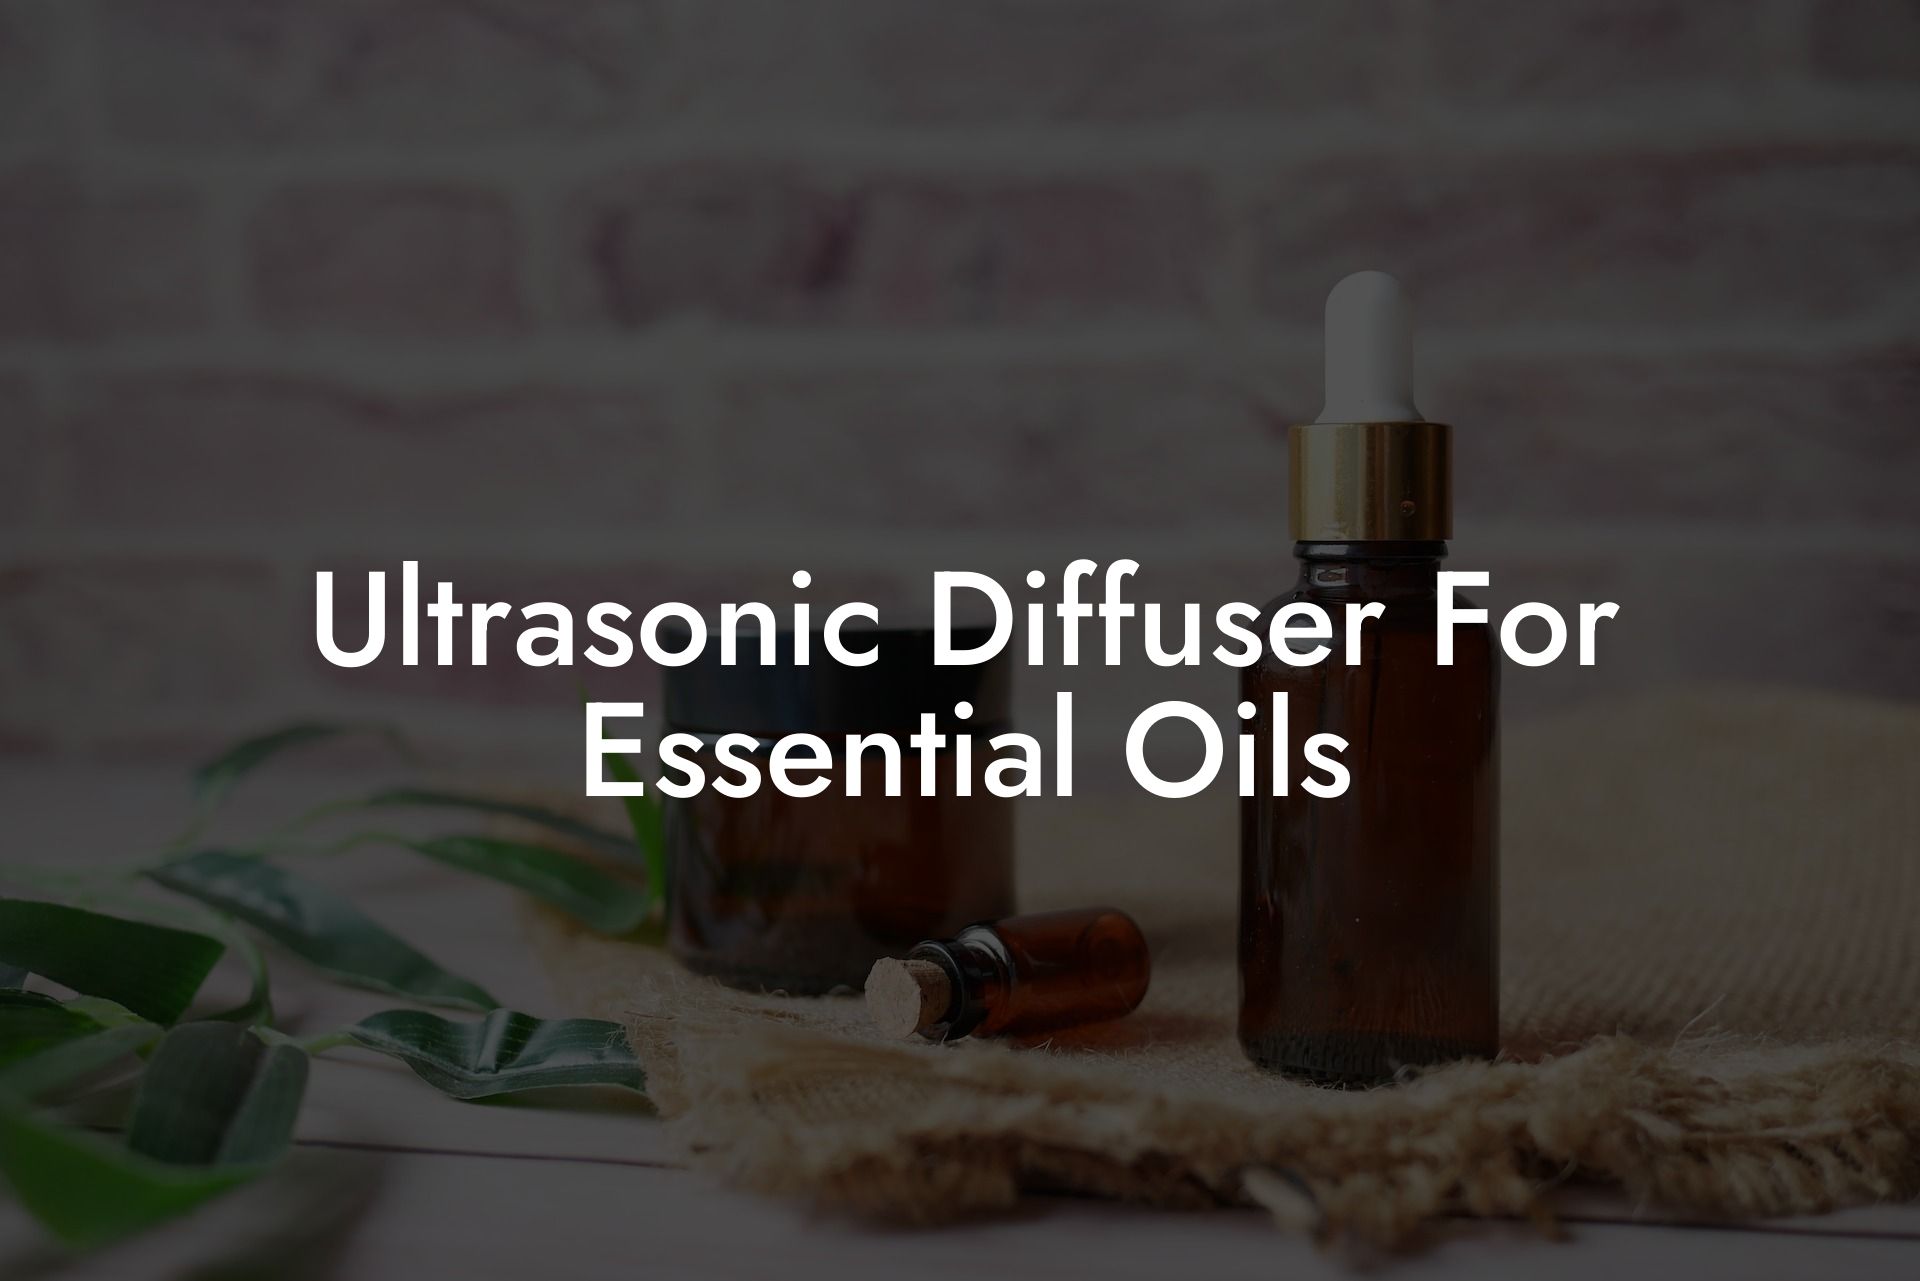 Ultrasonic Diffuser For Essential Oils